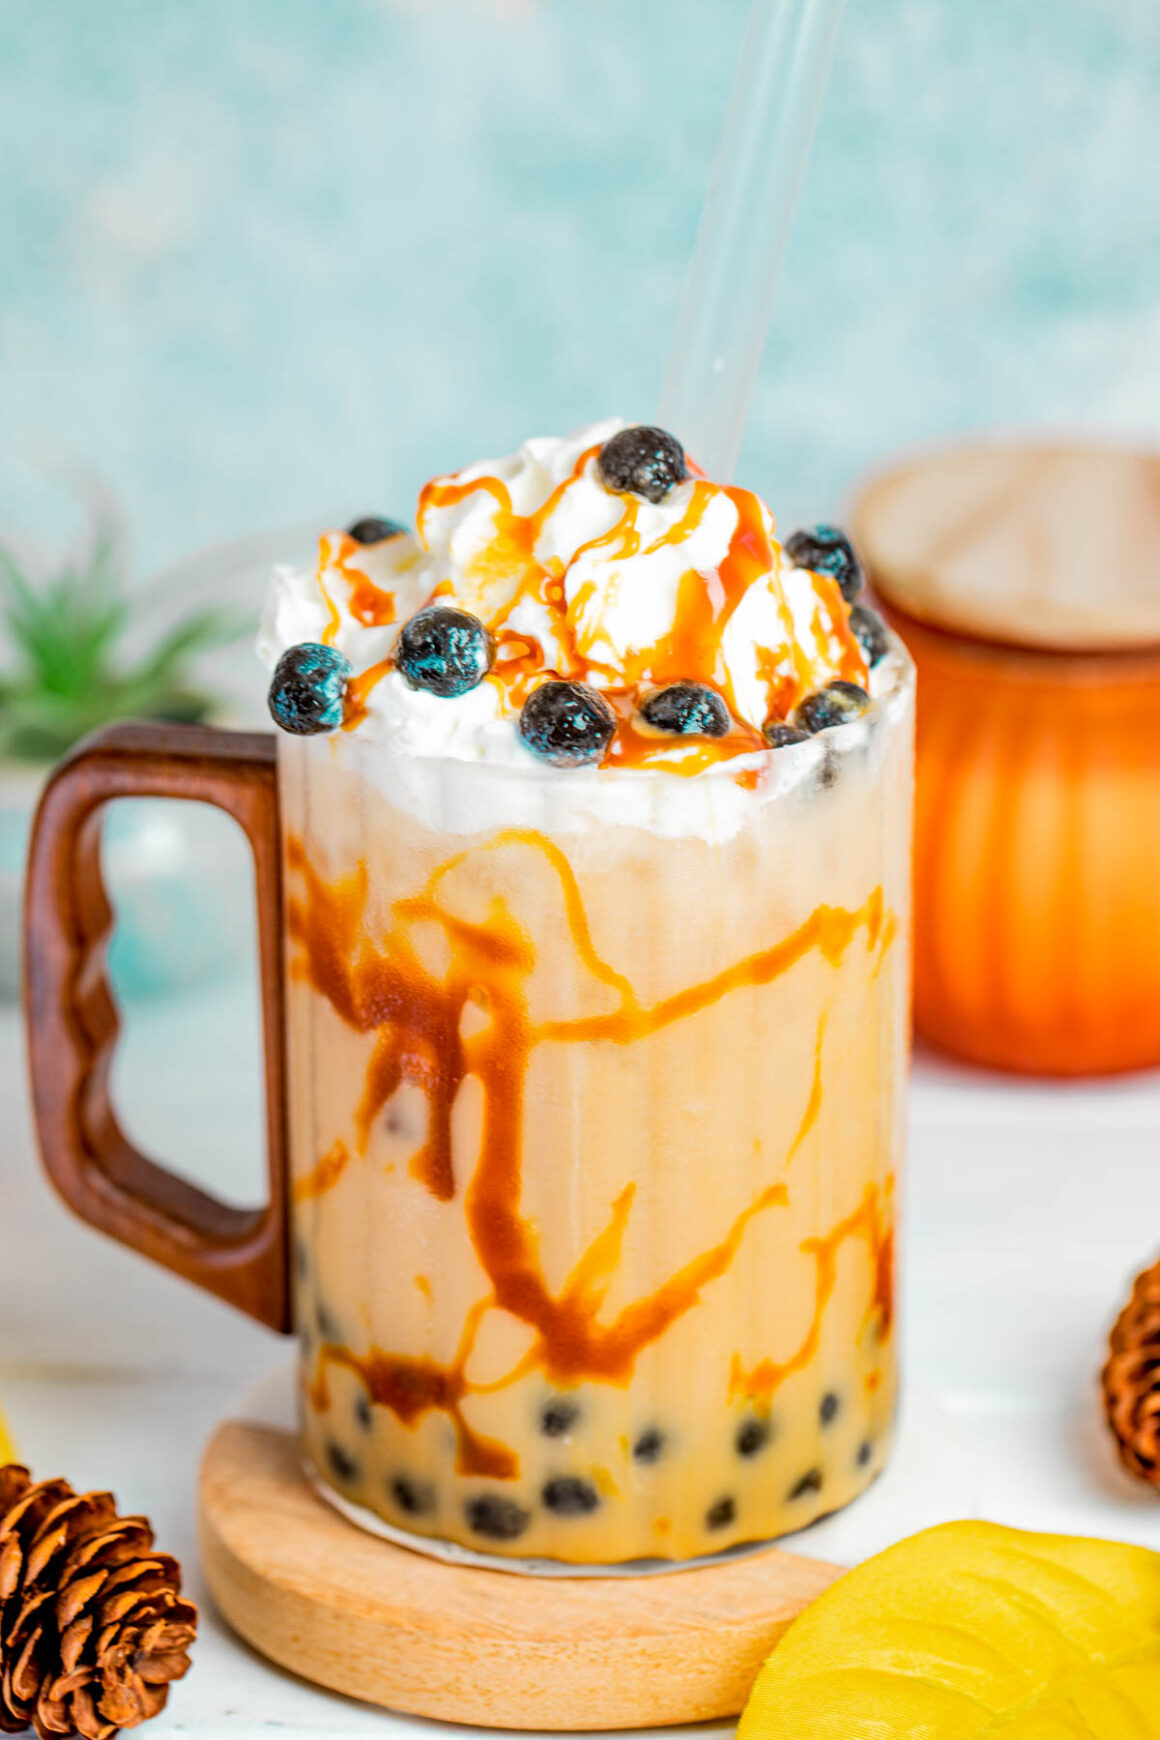 Its creamy texture, aromatic spices, and velvety pumpkin puree combine to create a cozy drinking experience that evokes fond memories of pumpkin pie enjoyed during the fall holidays.